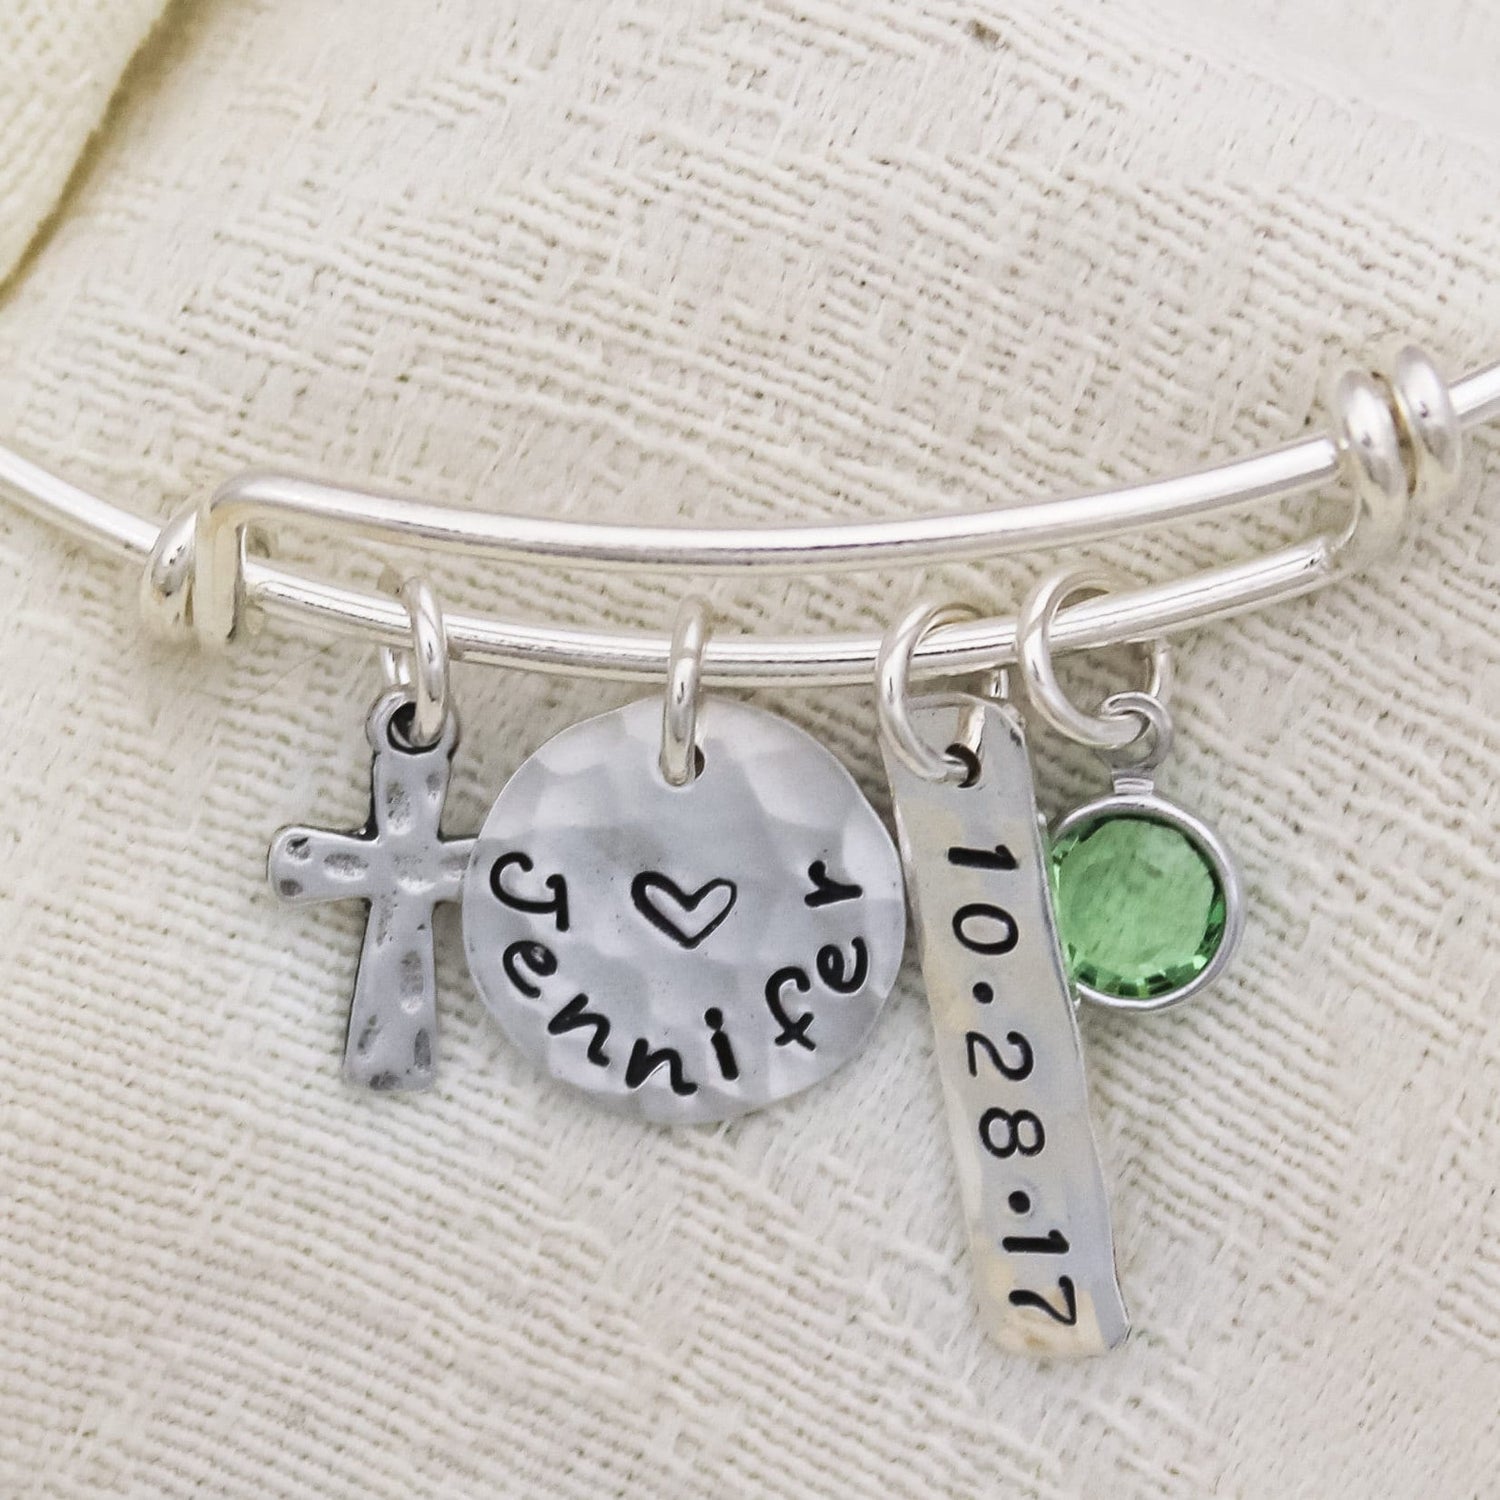 Personalized Confirmation Bangle, Communion Bracelet, Confirmation Gift, with Date Cross Adjustable Bangle Hand Stamped Sterling Silver